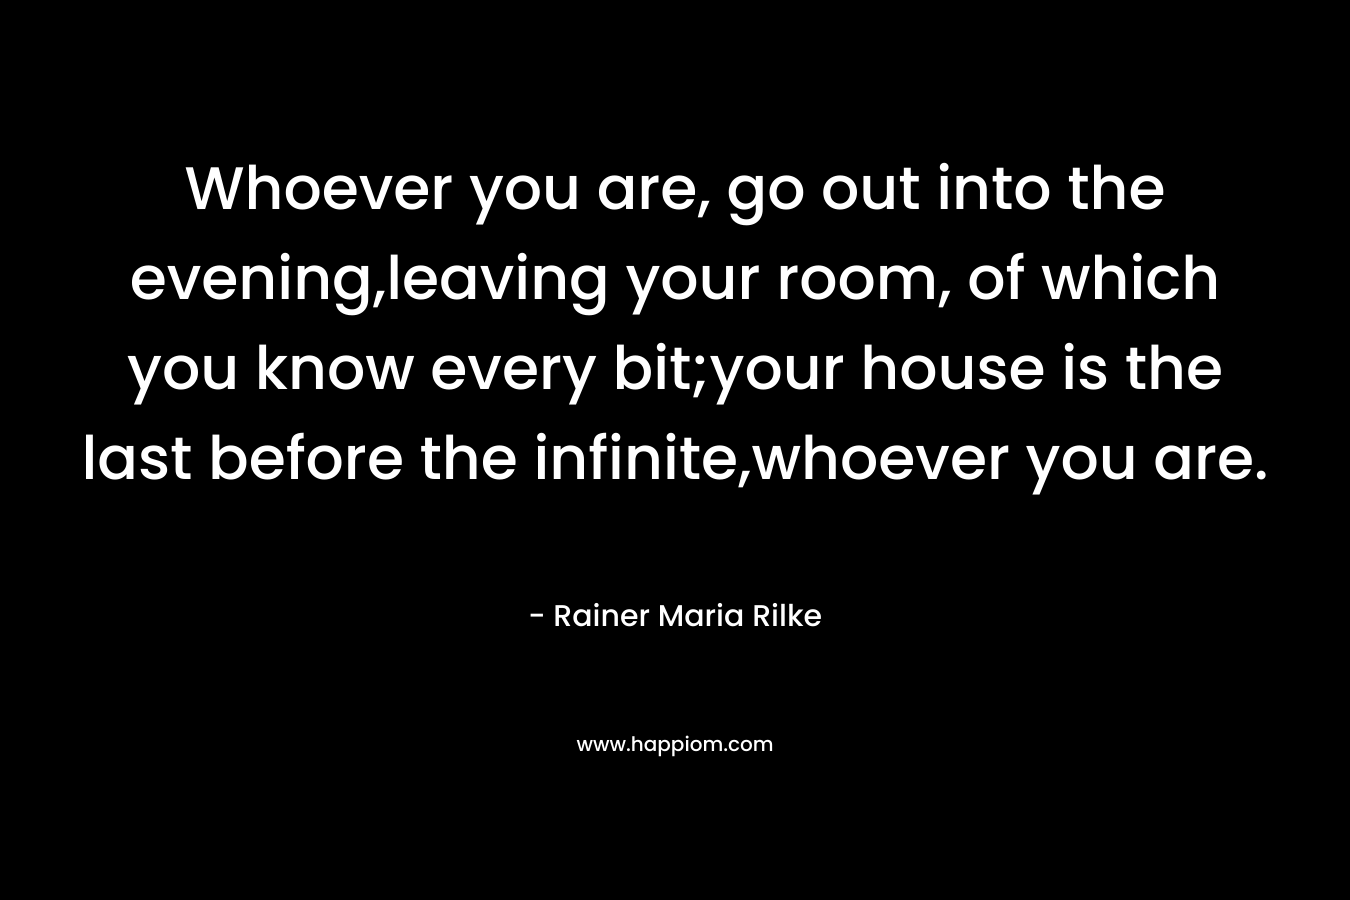 Whoever you are, go out into the evening,leaving your room, of which you know every bit;your house is the last before the infinite,whoever you are. – Rainer Maria Rilke